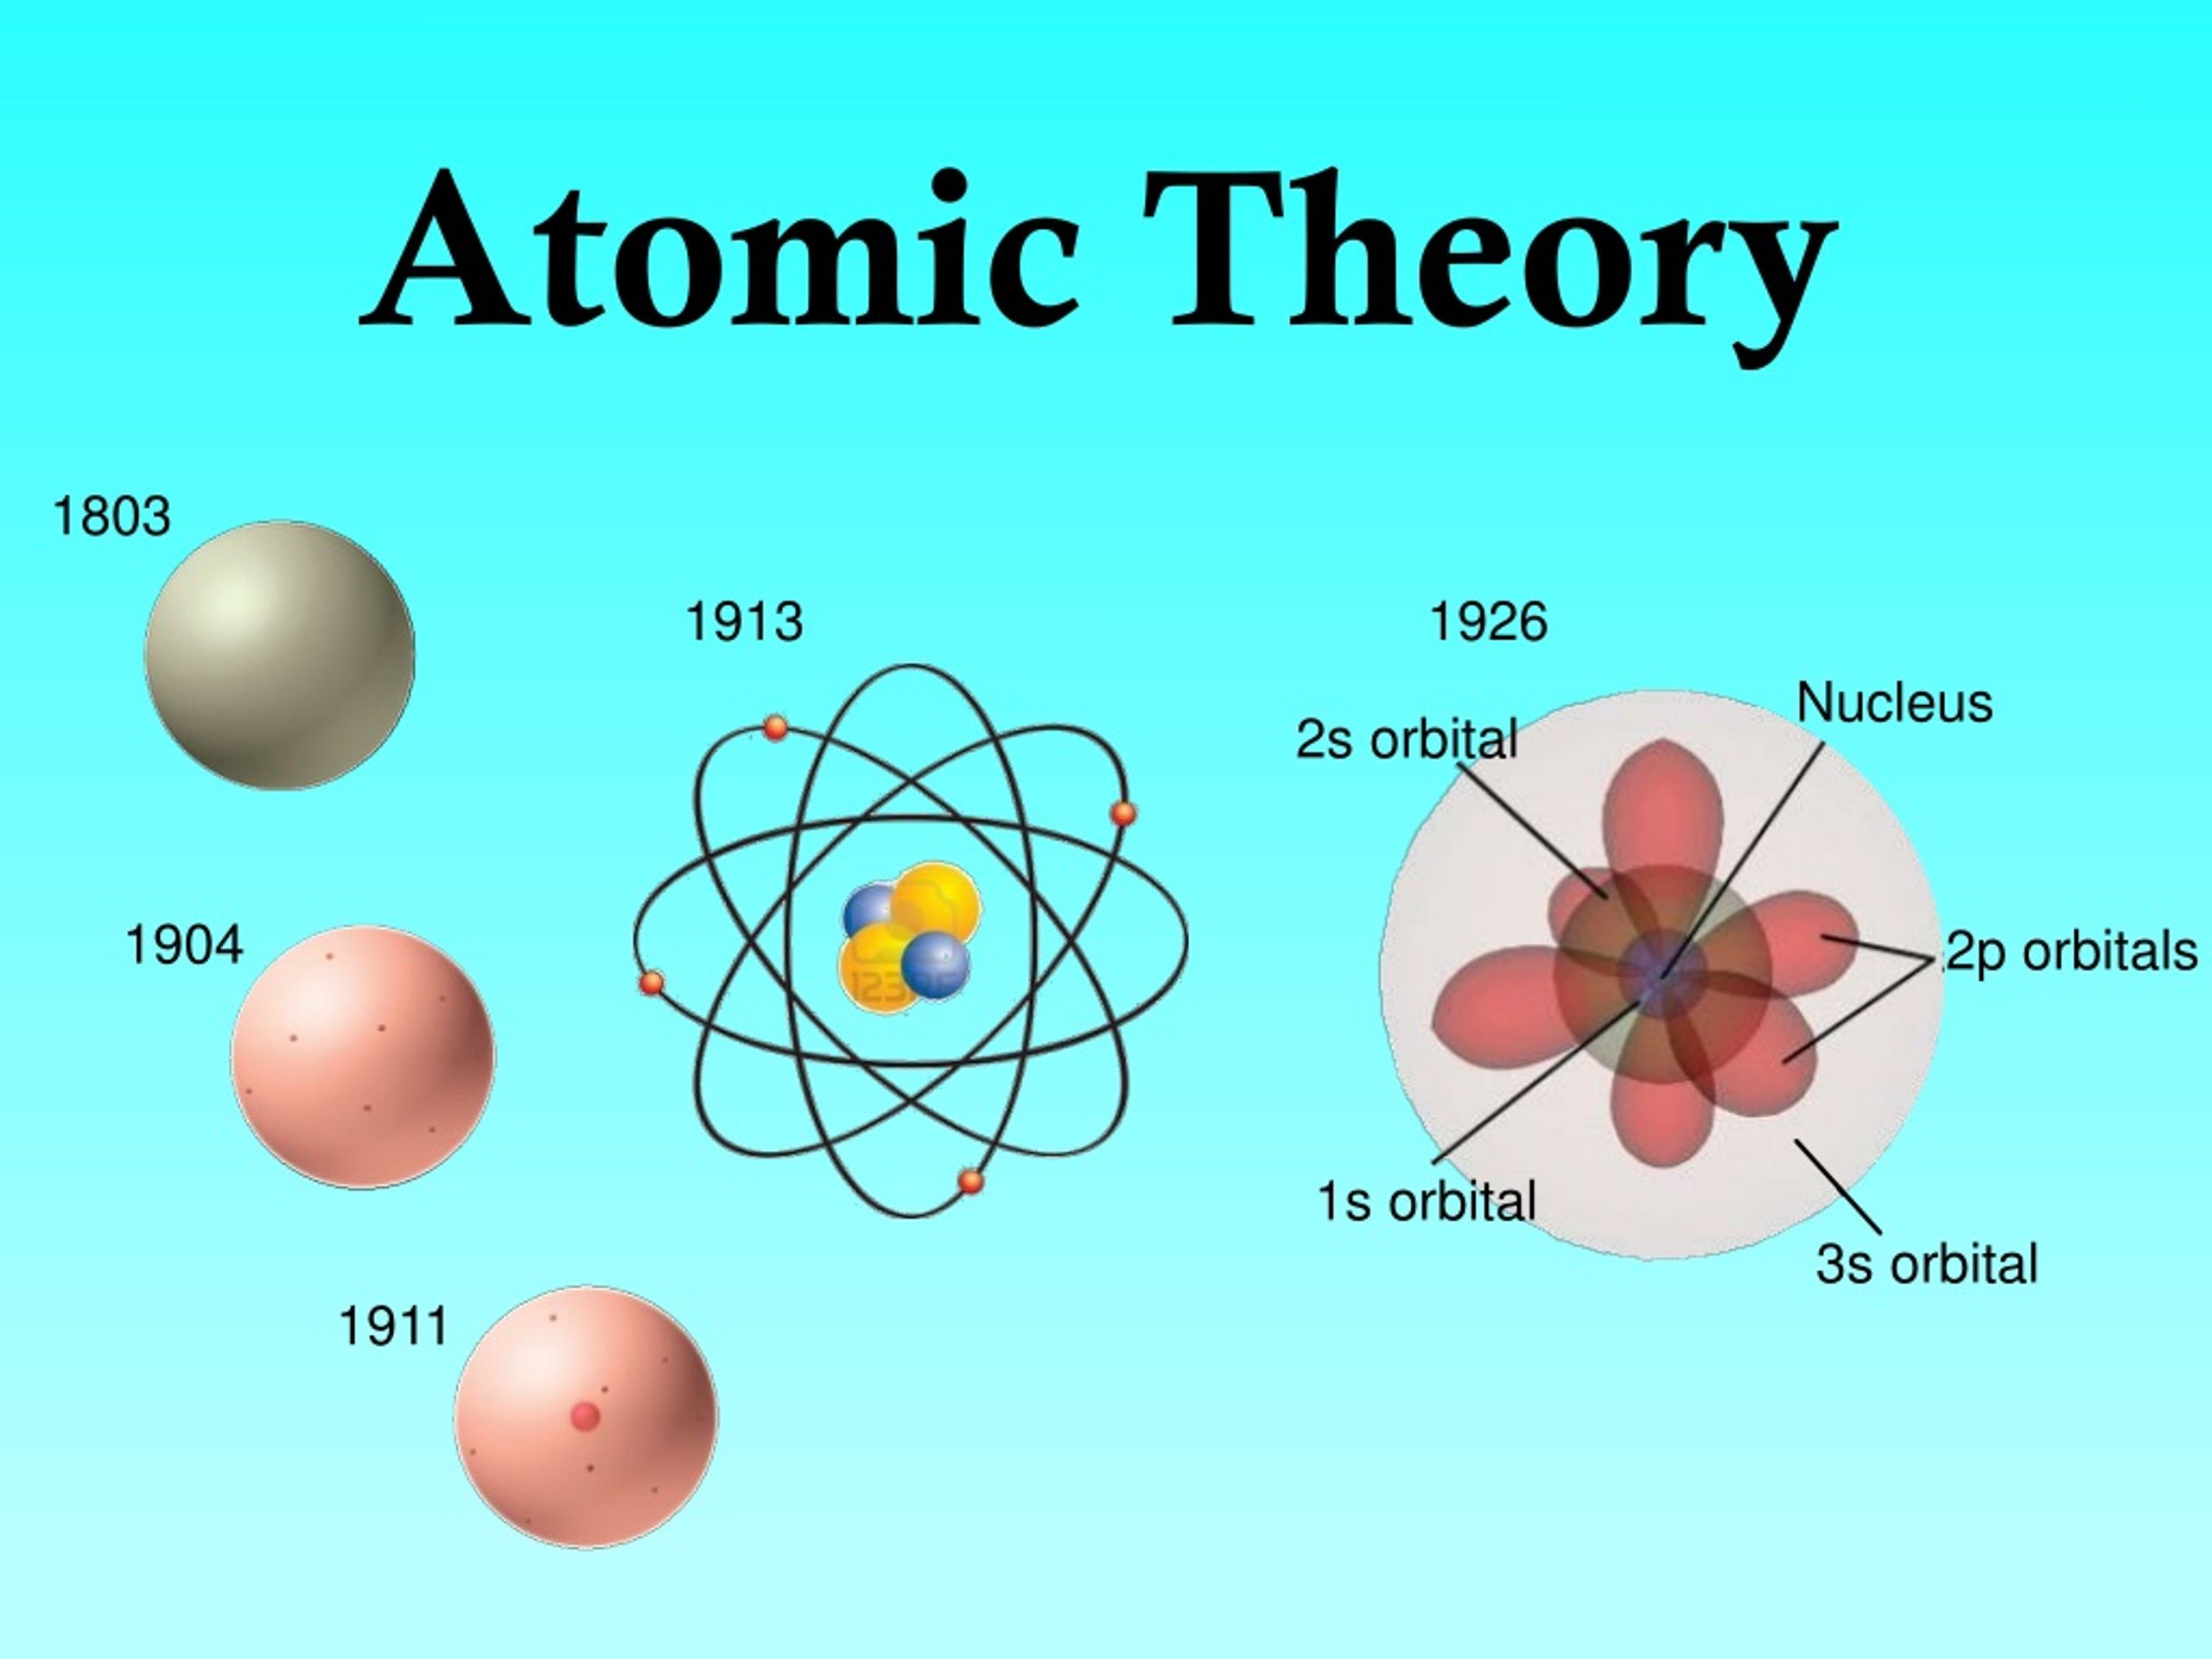 he developed the atomic theory